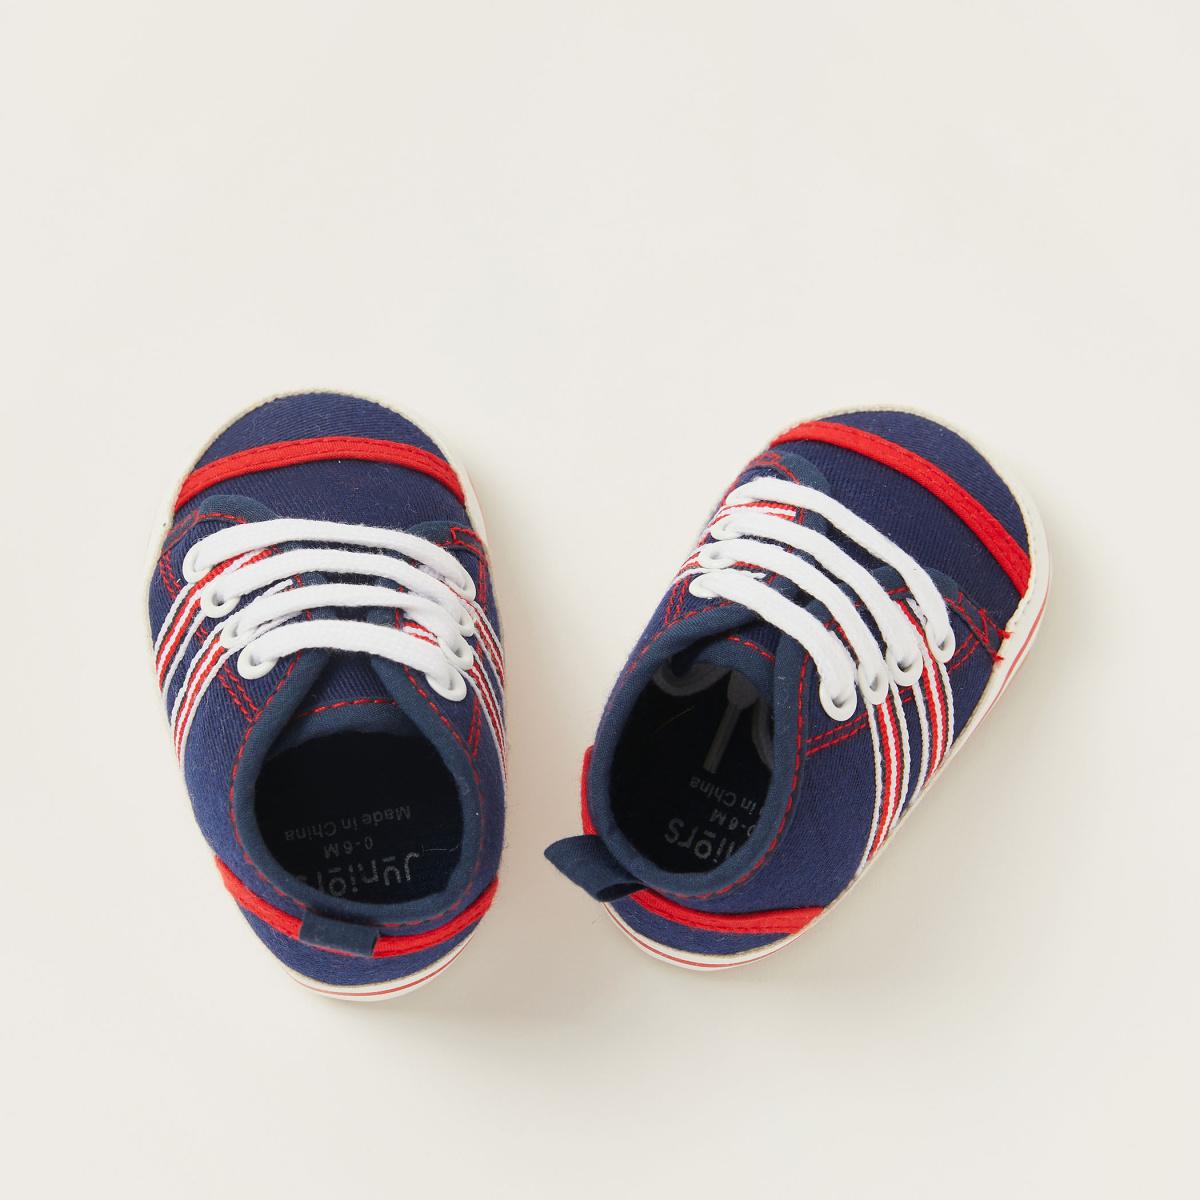 Babyshop Juniors Striped Baby Shoes Baby Boys (0-2